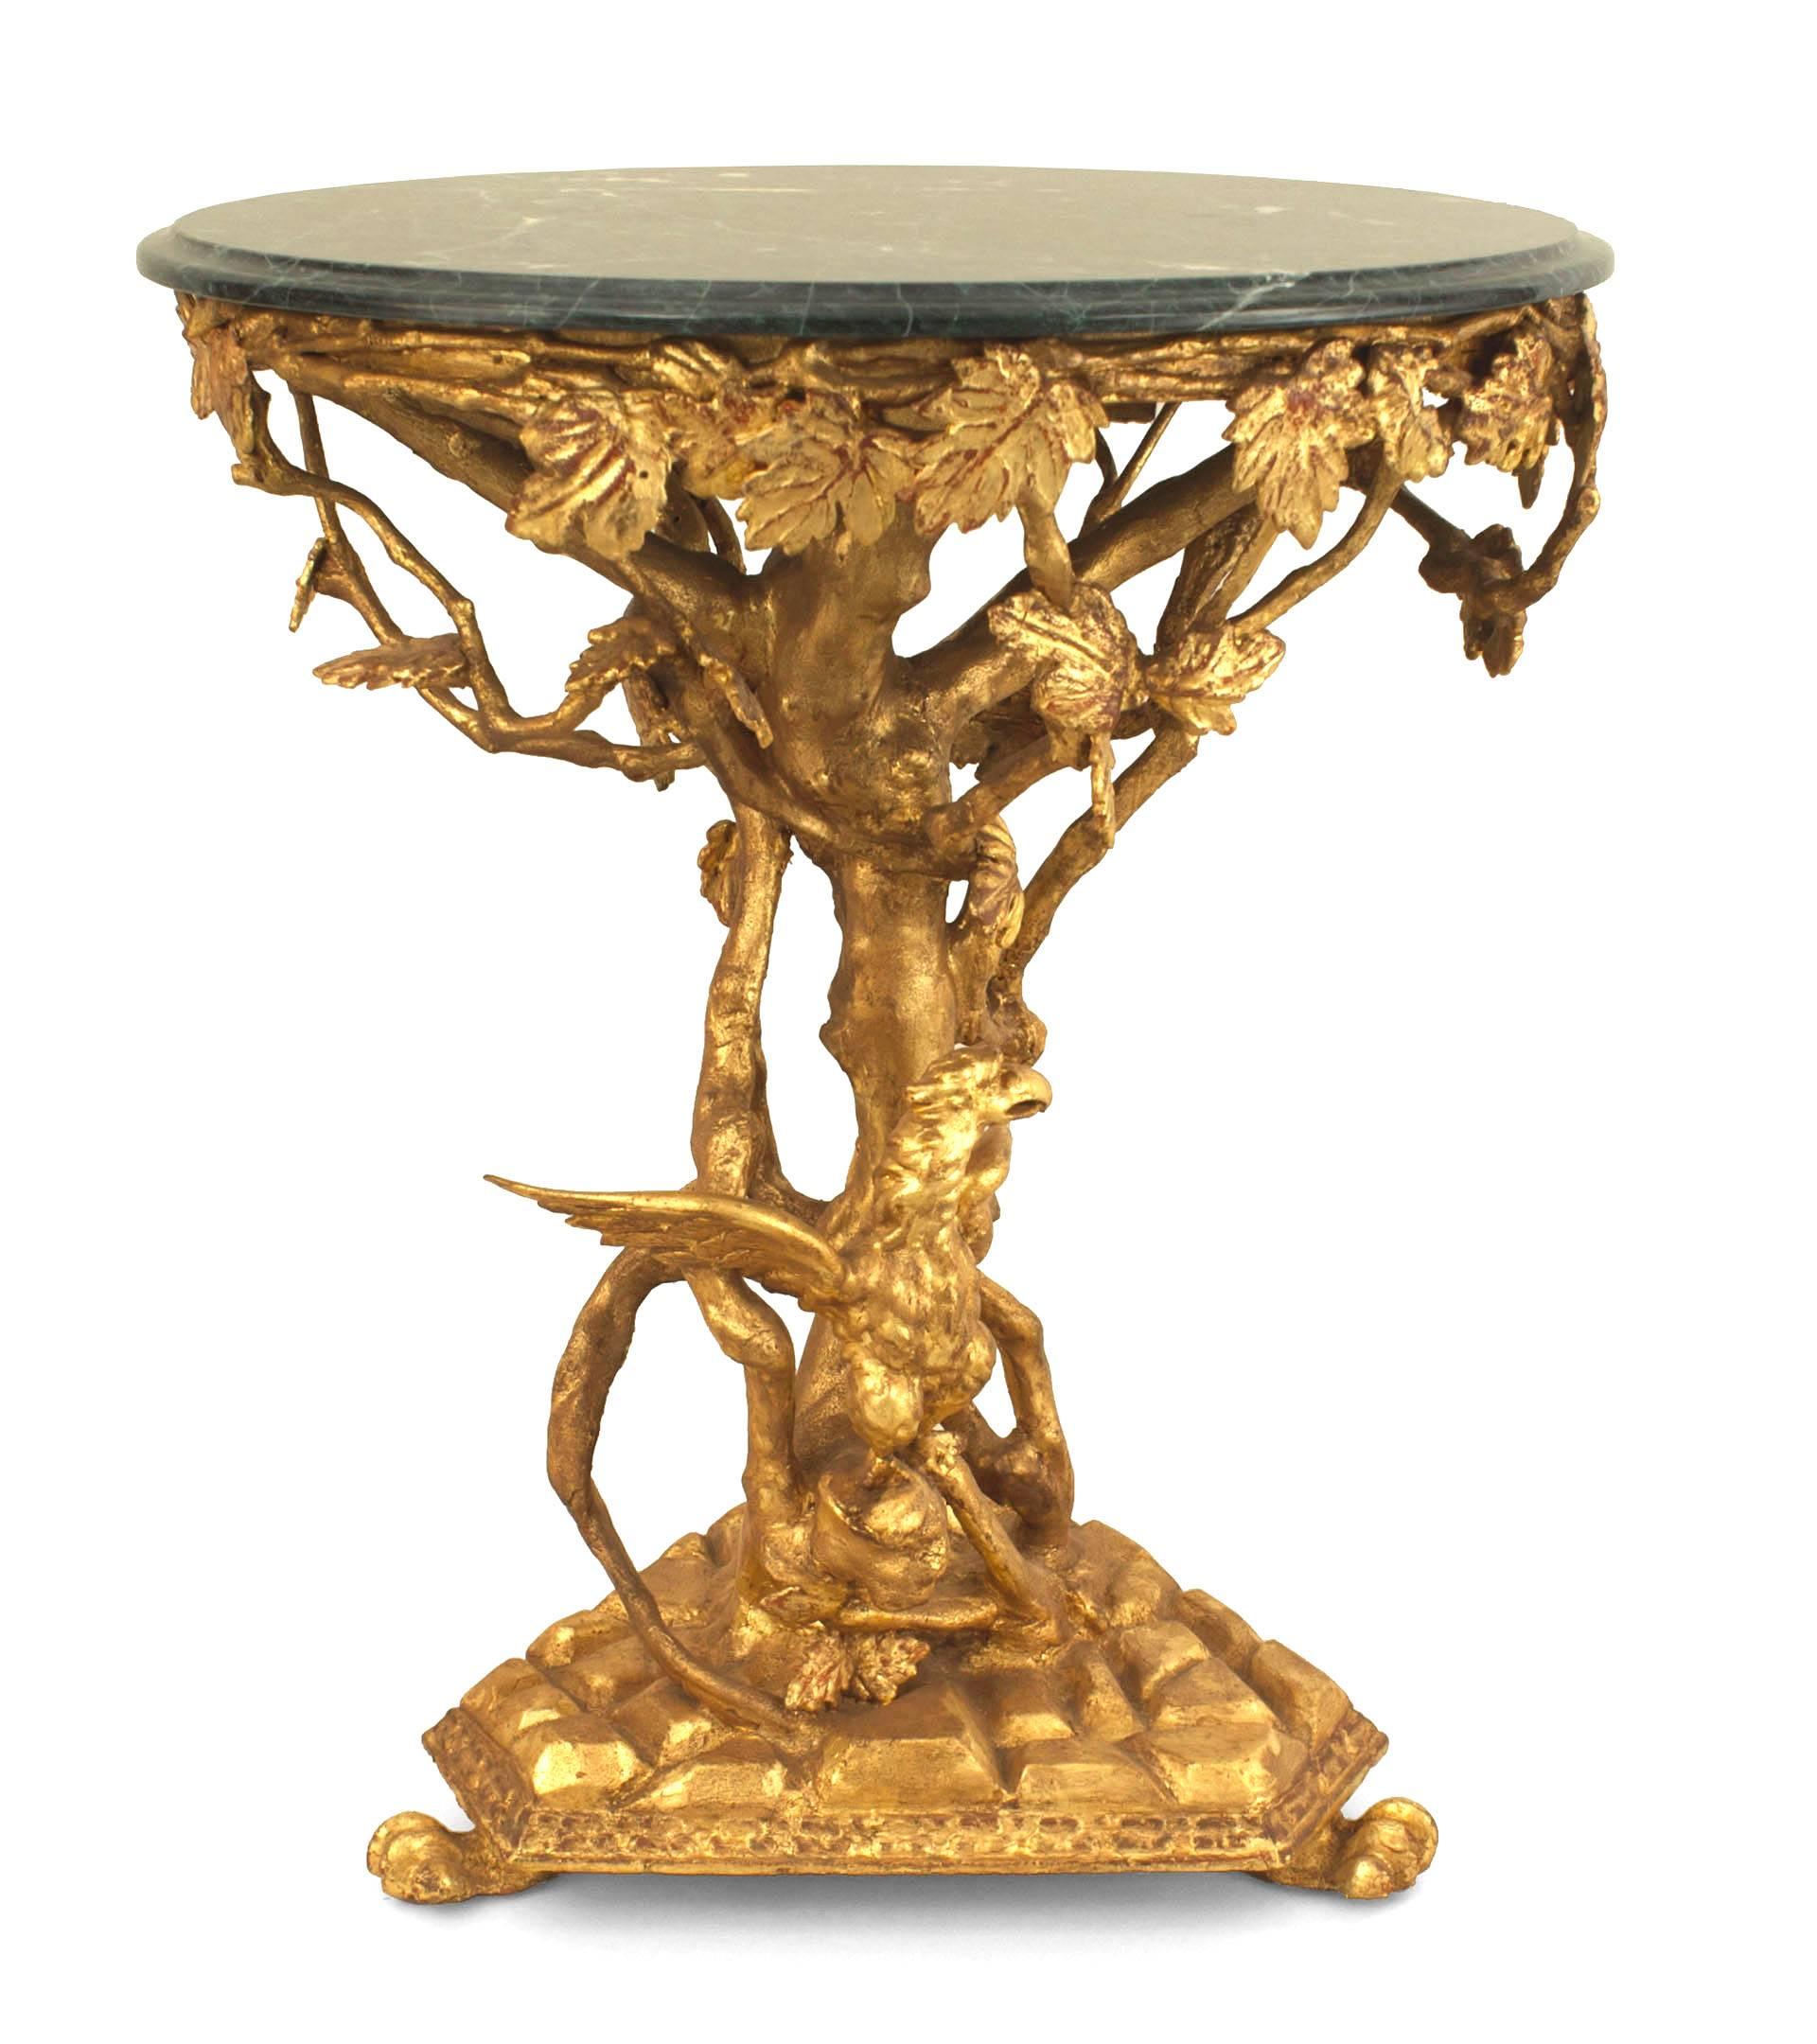 Italian Rococo (18th century) gilt round end table with a floral carved design and eagle figure resting on a triangular base with an apron supporting a round green marble top.
   